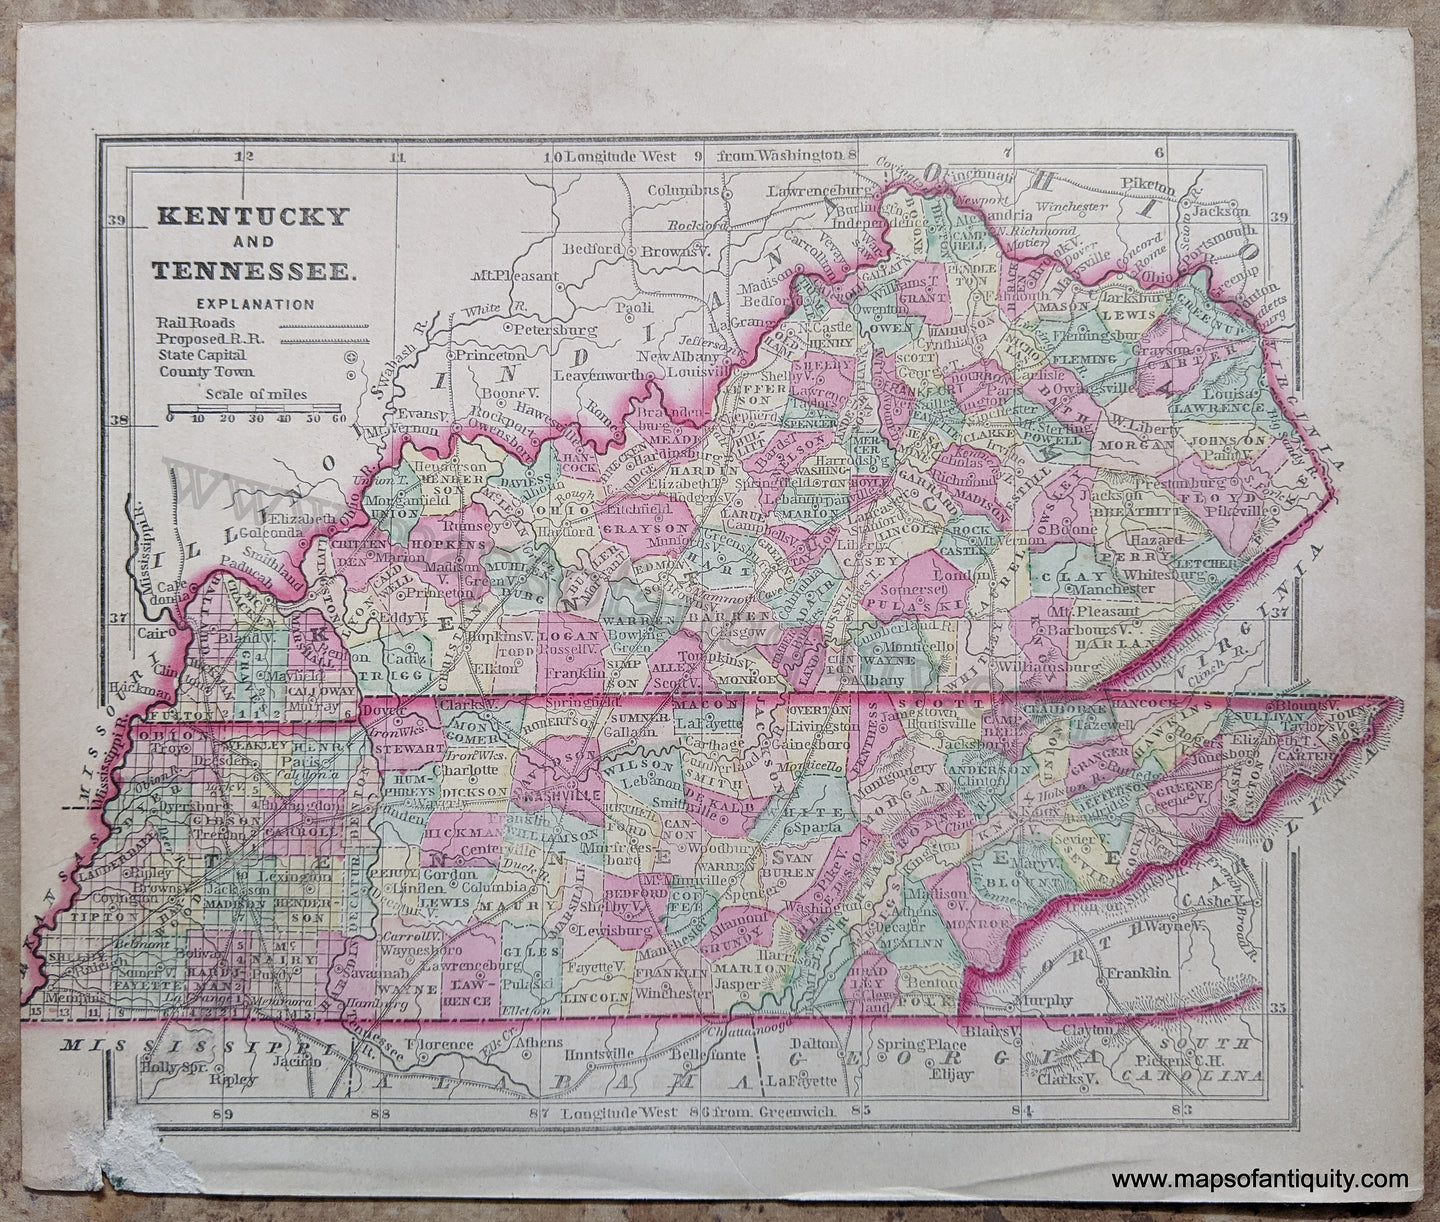 Antique-Hand-Colored-Map-Kentucky-and-Tennessee-United-States-Midwest-1857-Morse-and-Gaston-Maps-Of-Antiquity-1800s-19th-century